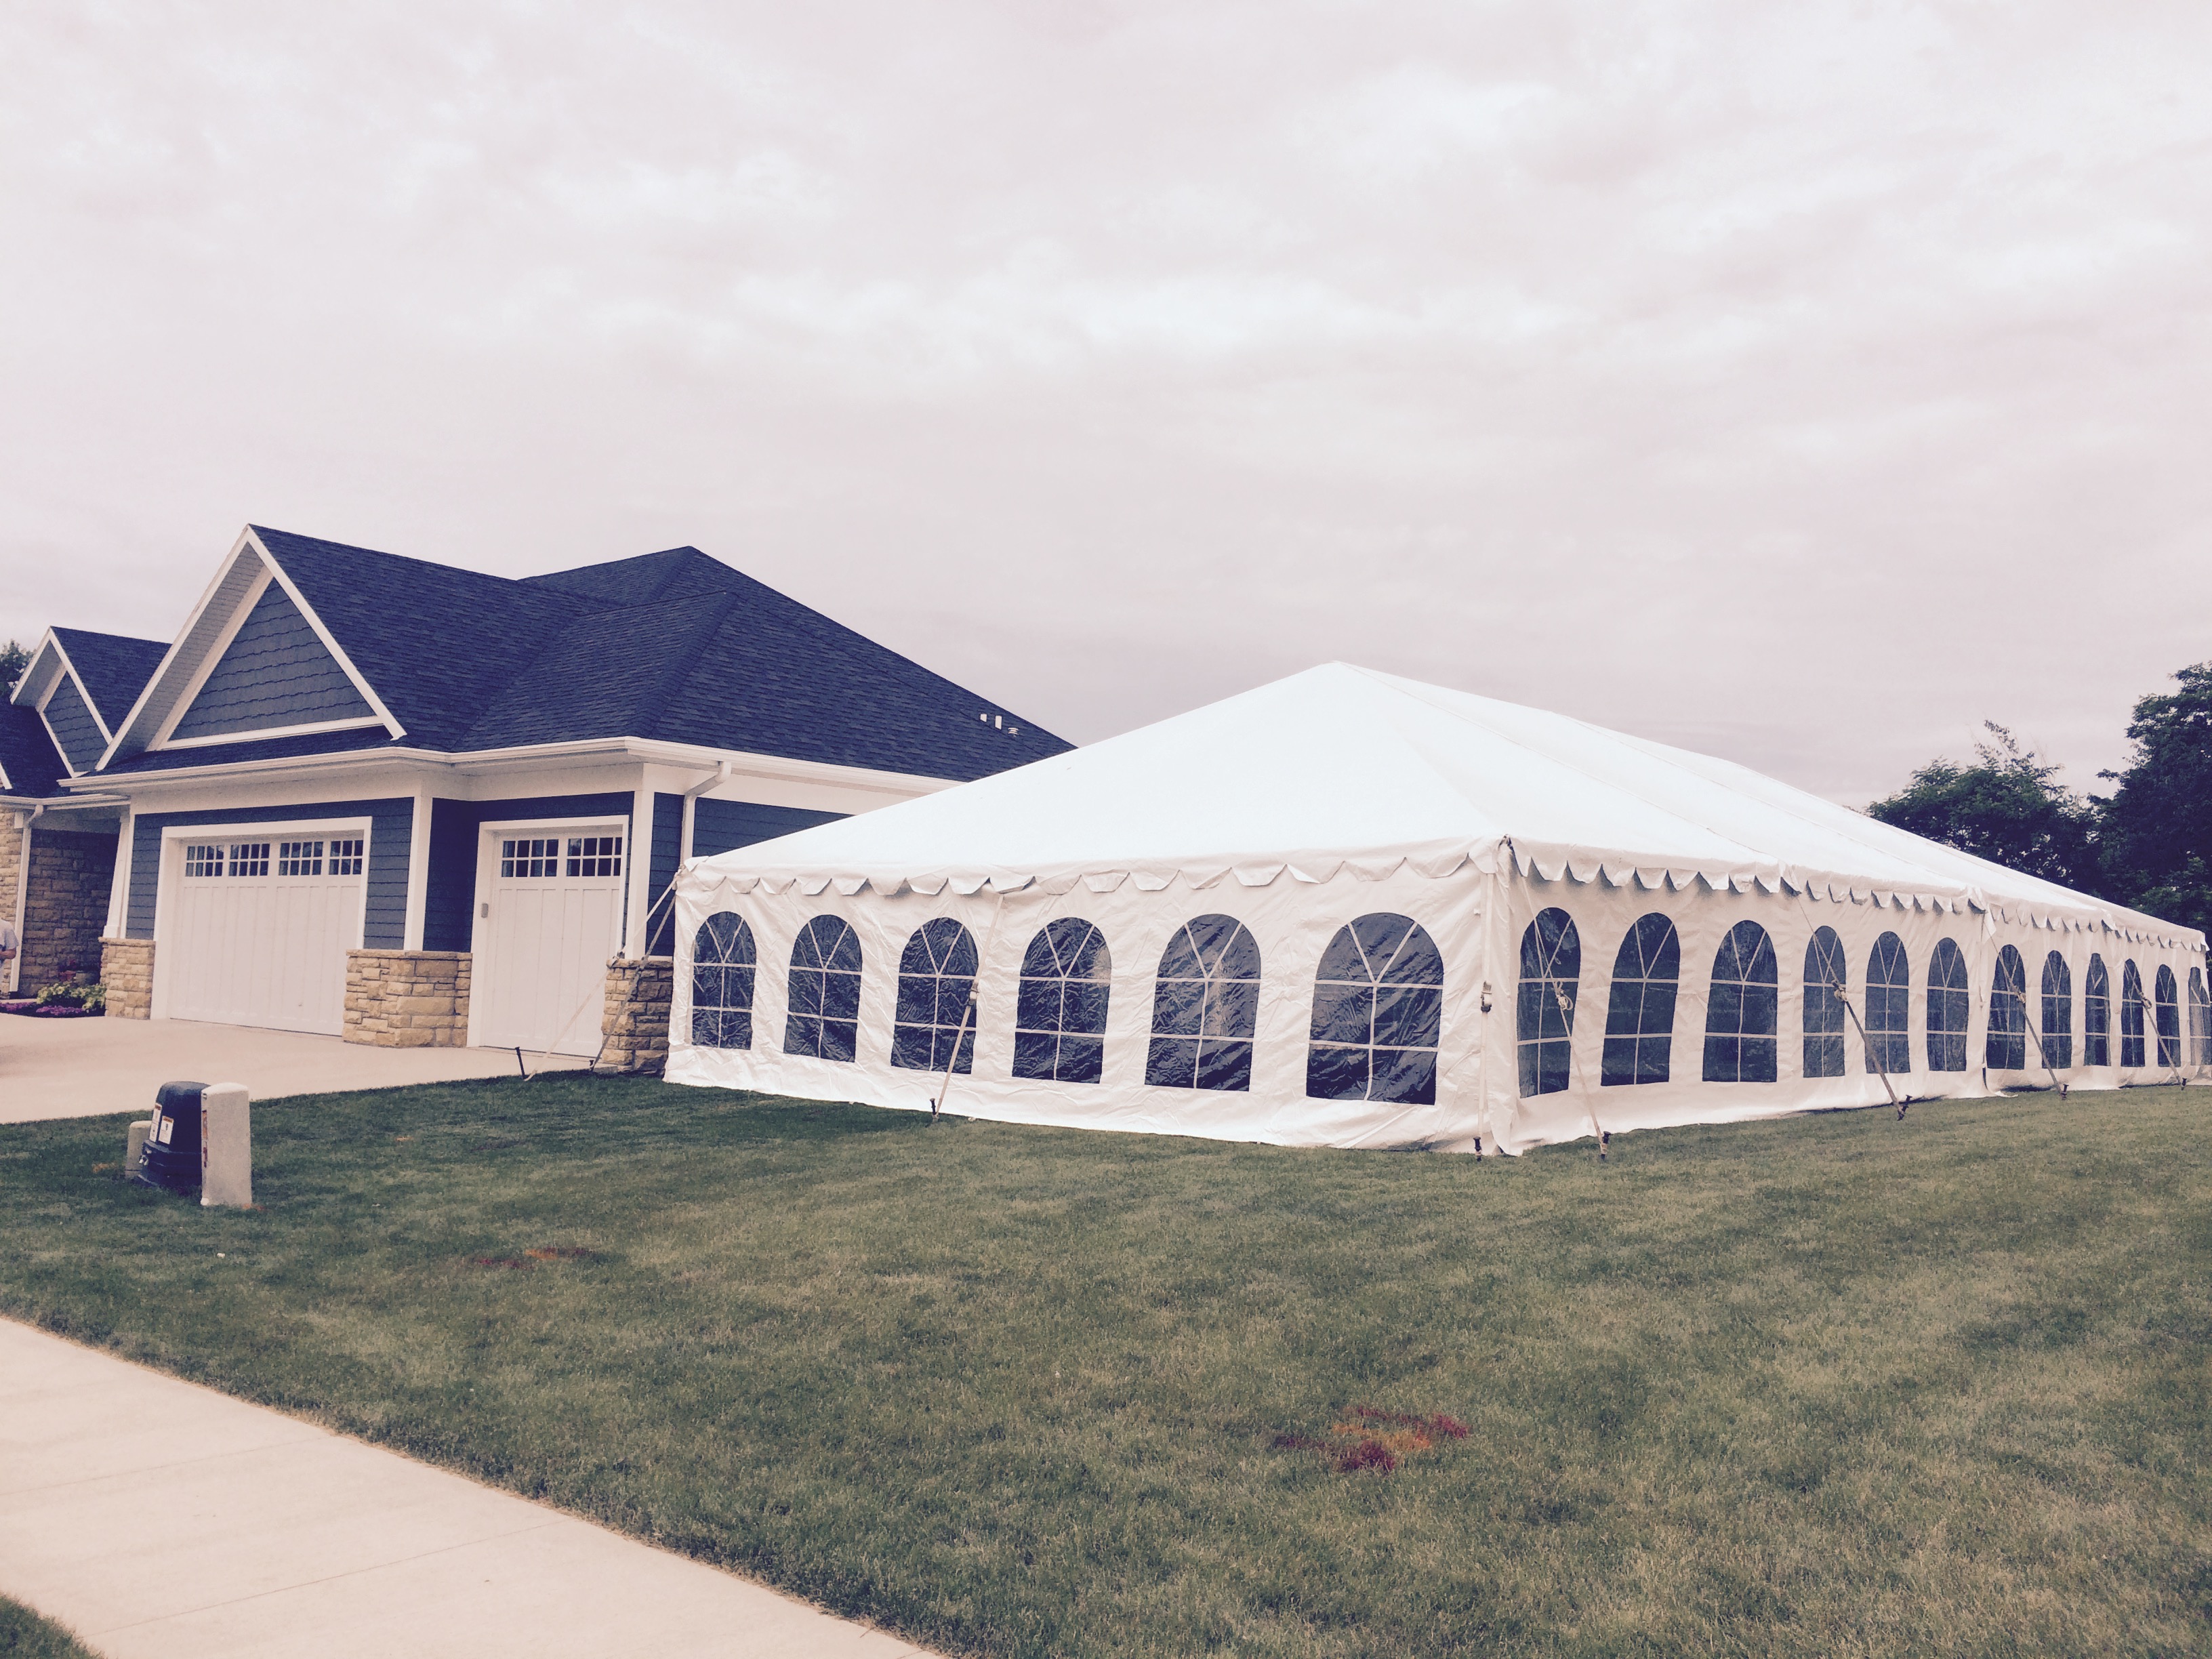 Wedding Reception Tent In Side Yard Next To Home Dubuque IA